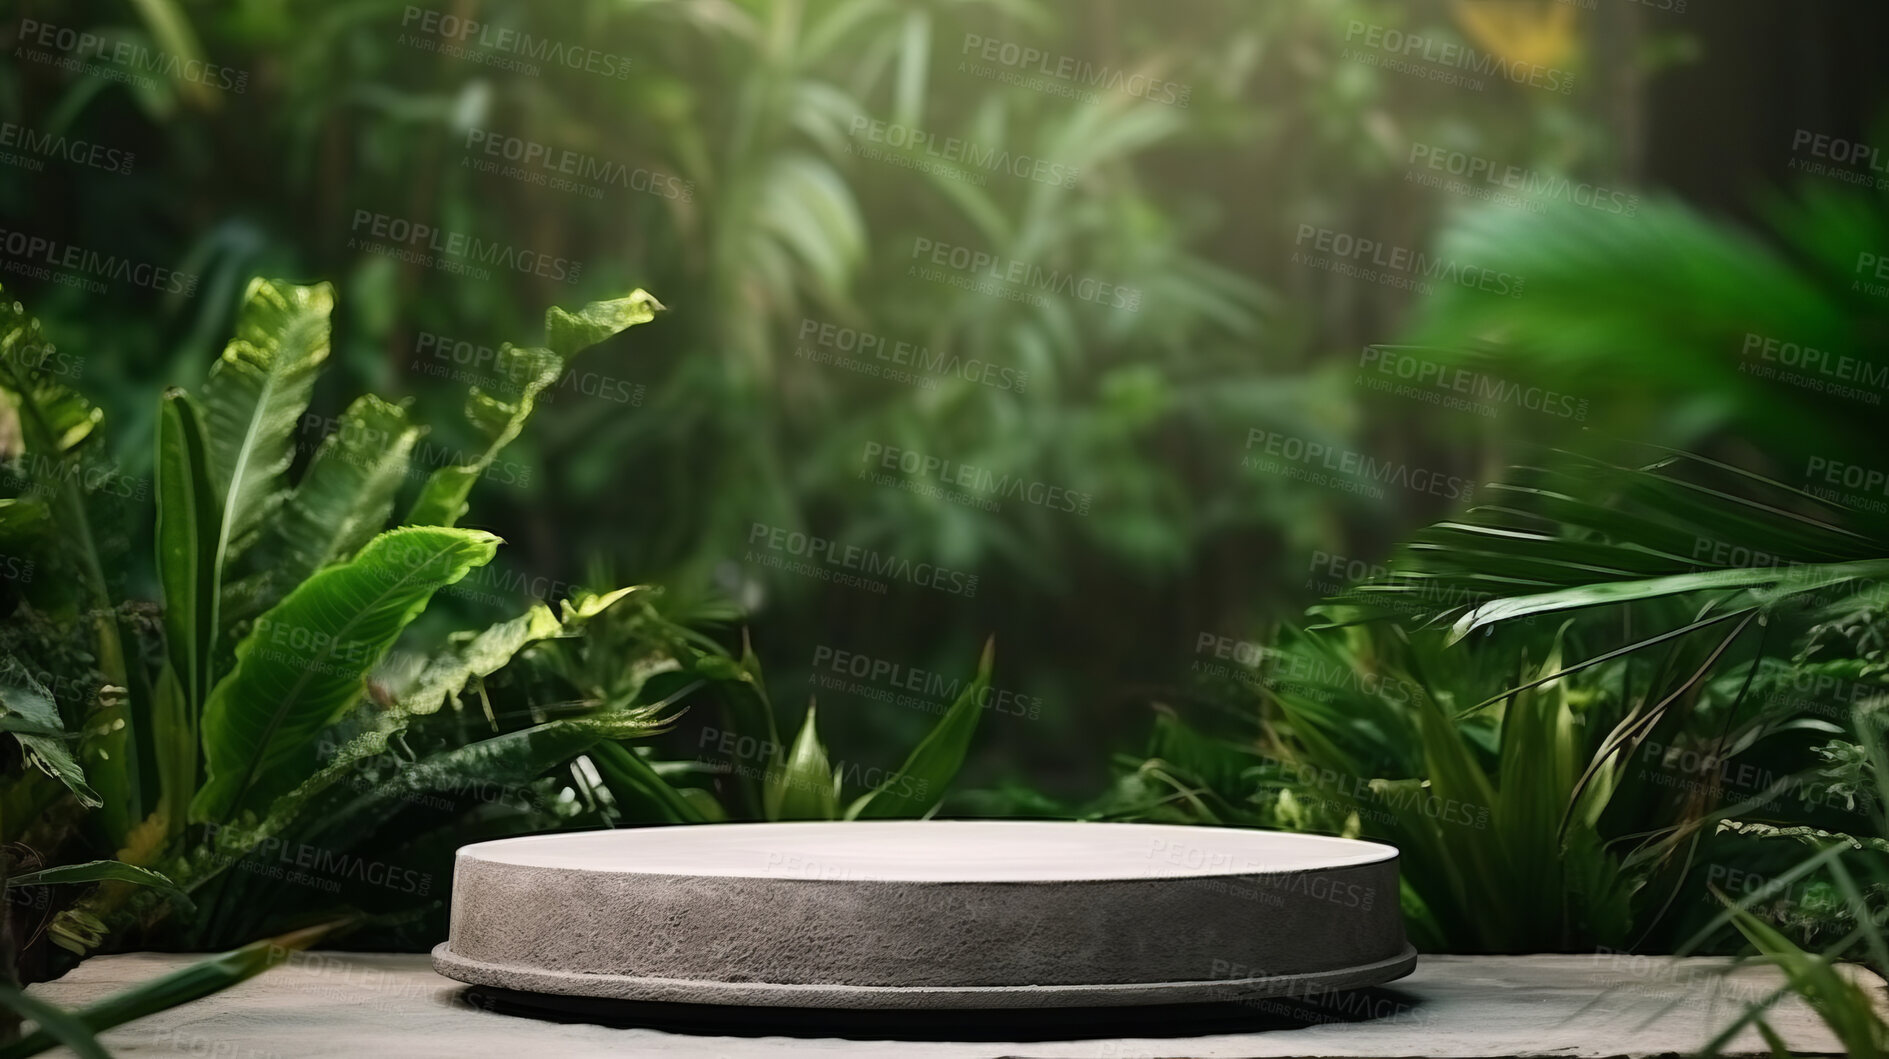 Buy stock photo Round stone surface in green forest with copyspace. Marketing advertising platform